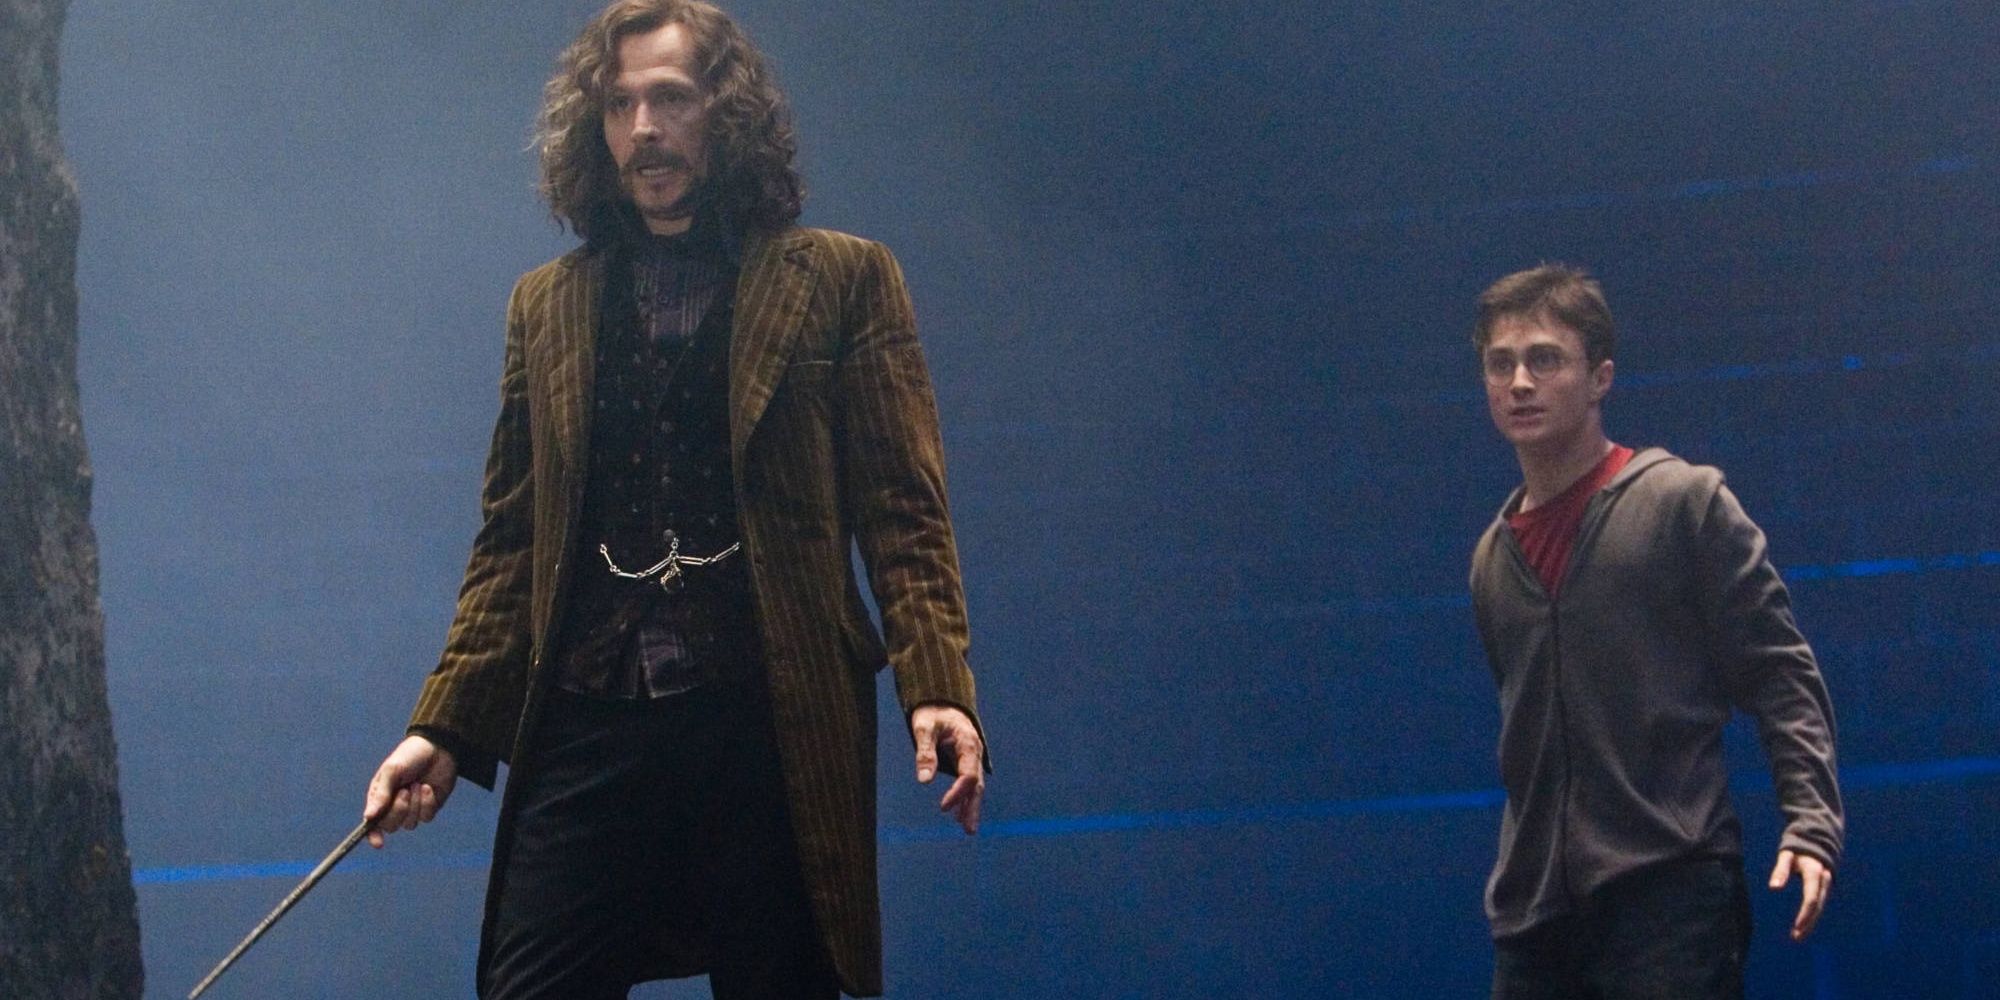 sirius black and harry potter stood next to each other holding their wands